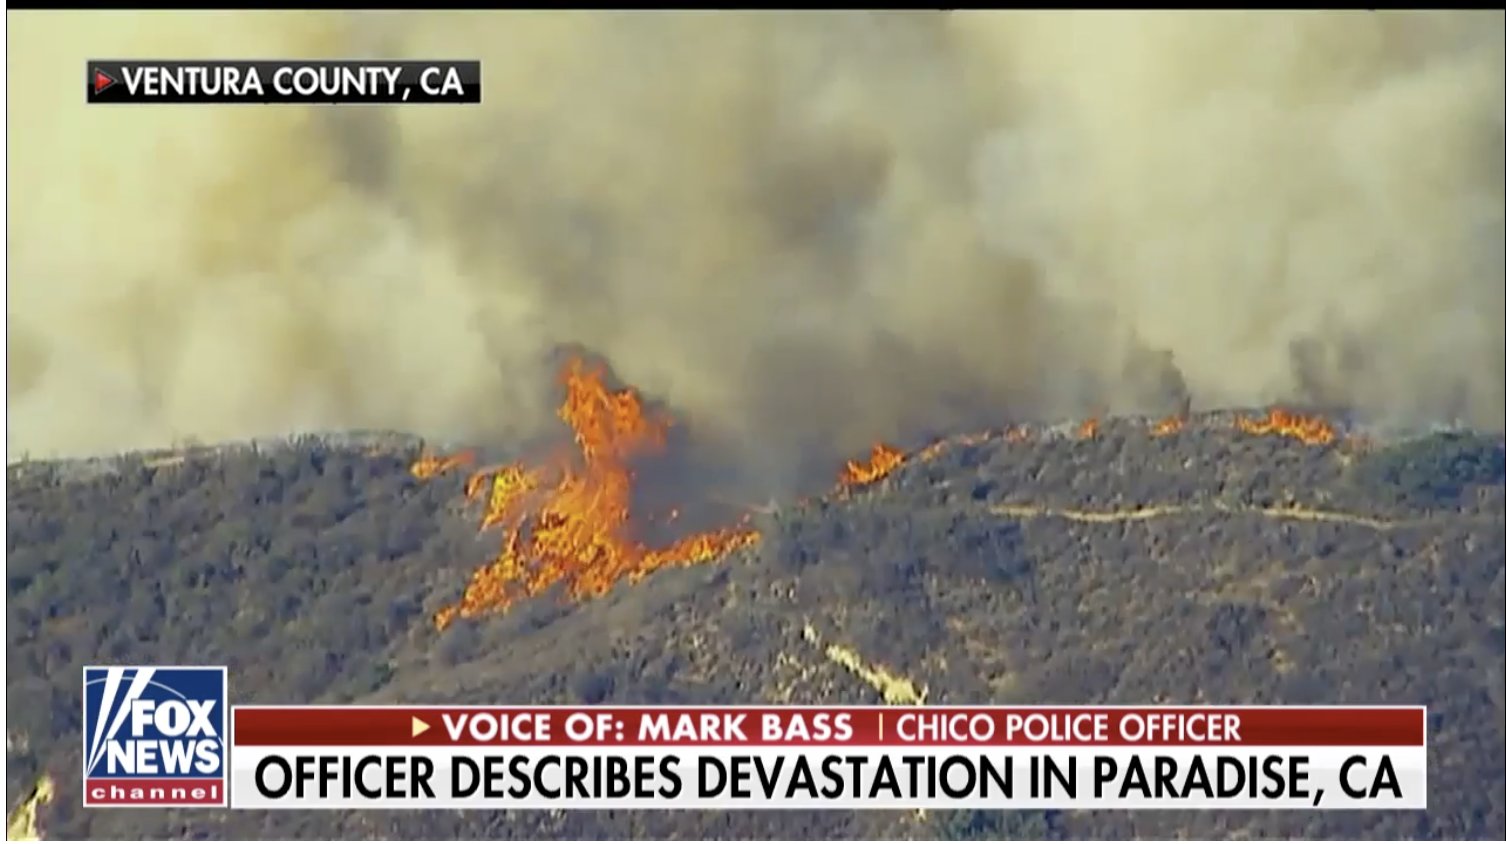 Fire beaks out in California the day after the FAKE SHOOTING in Thousand Oaks.